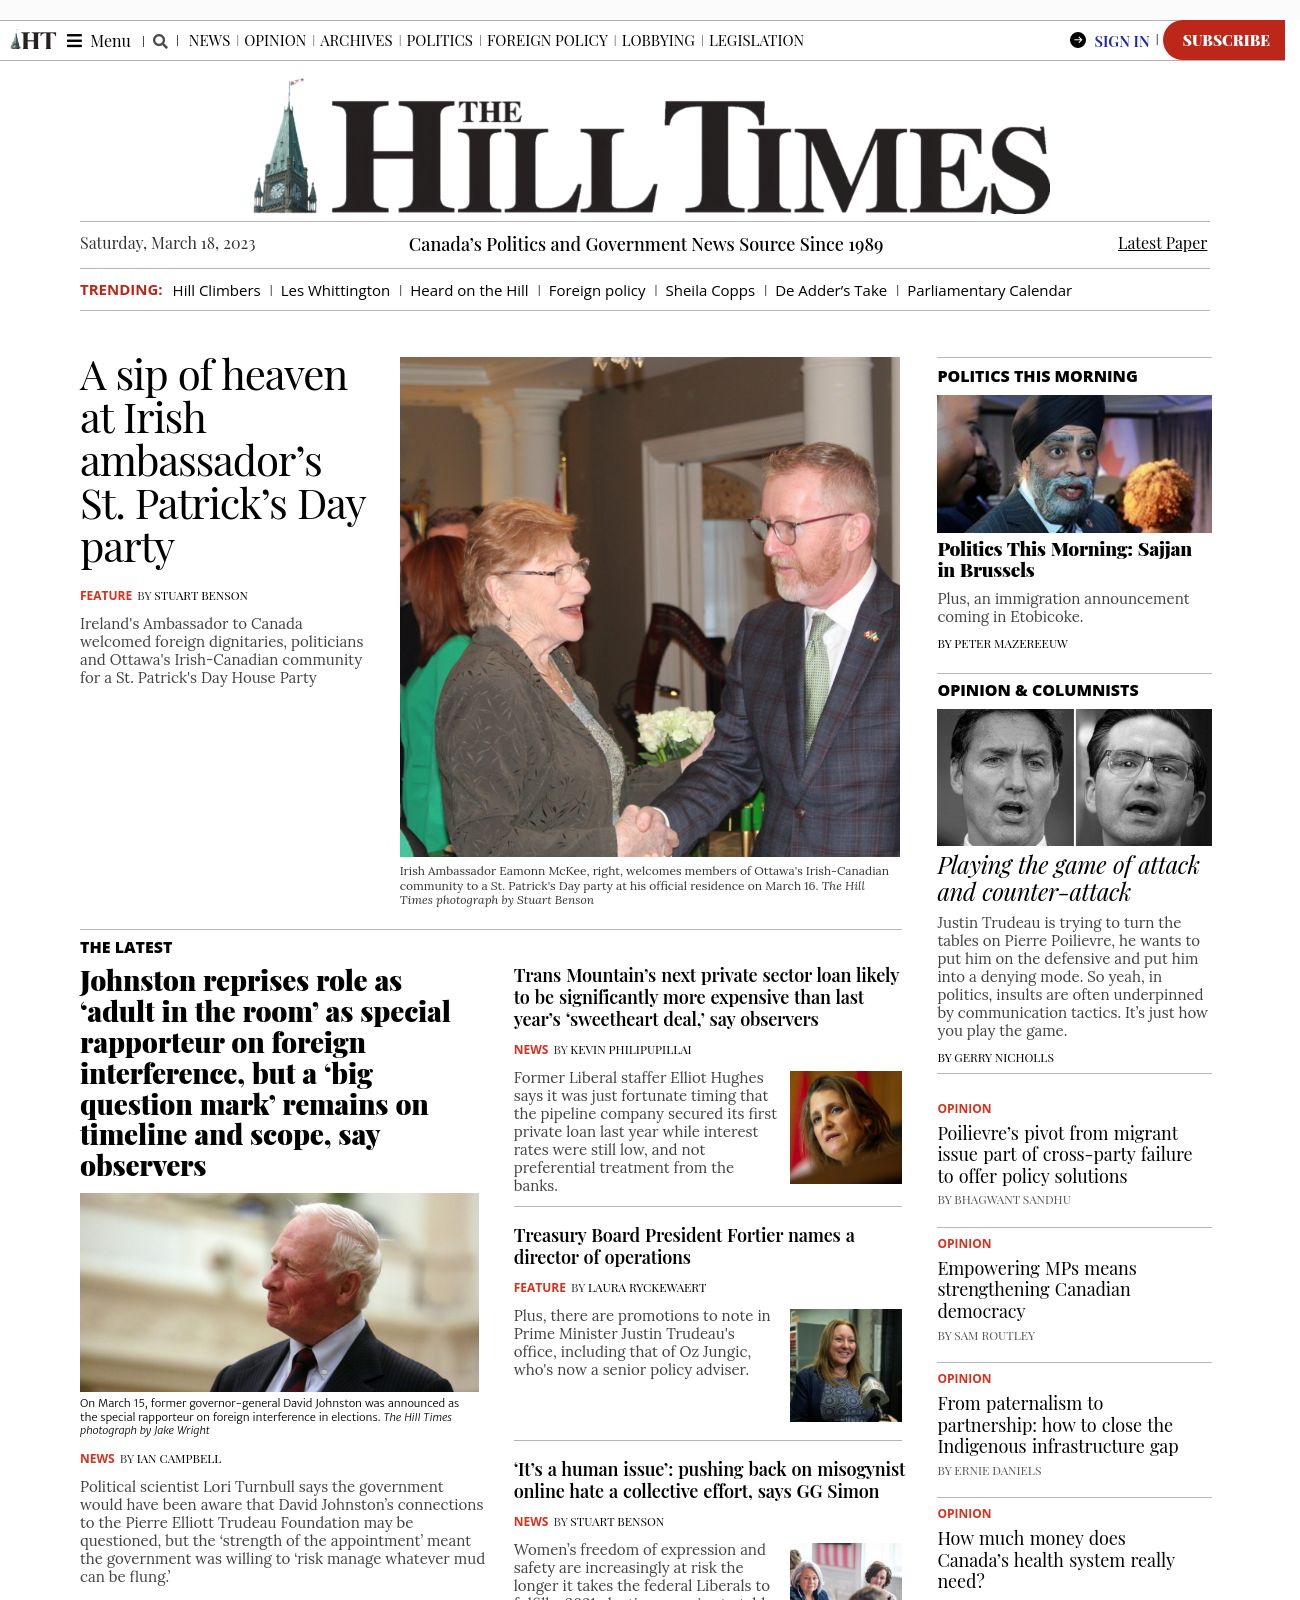 The Hill Times at 2023-03-18 23:05:54-04:00 local time